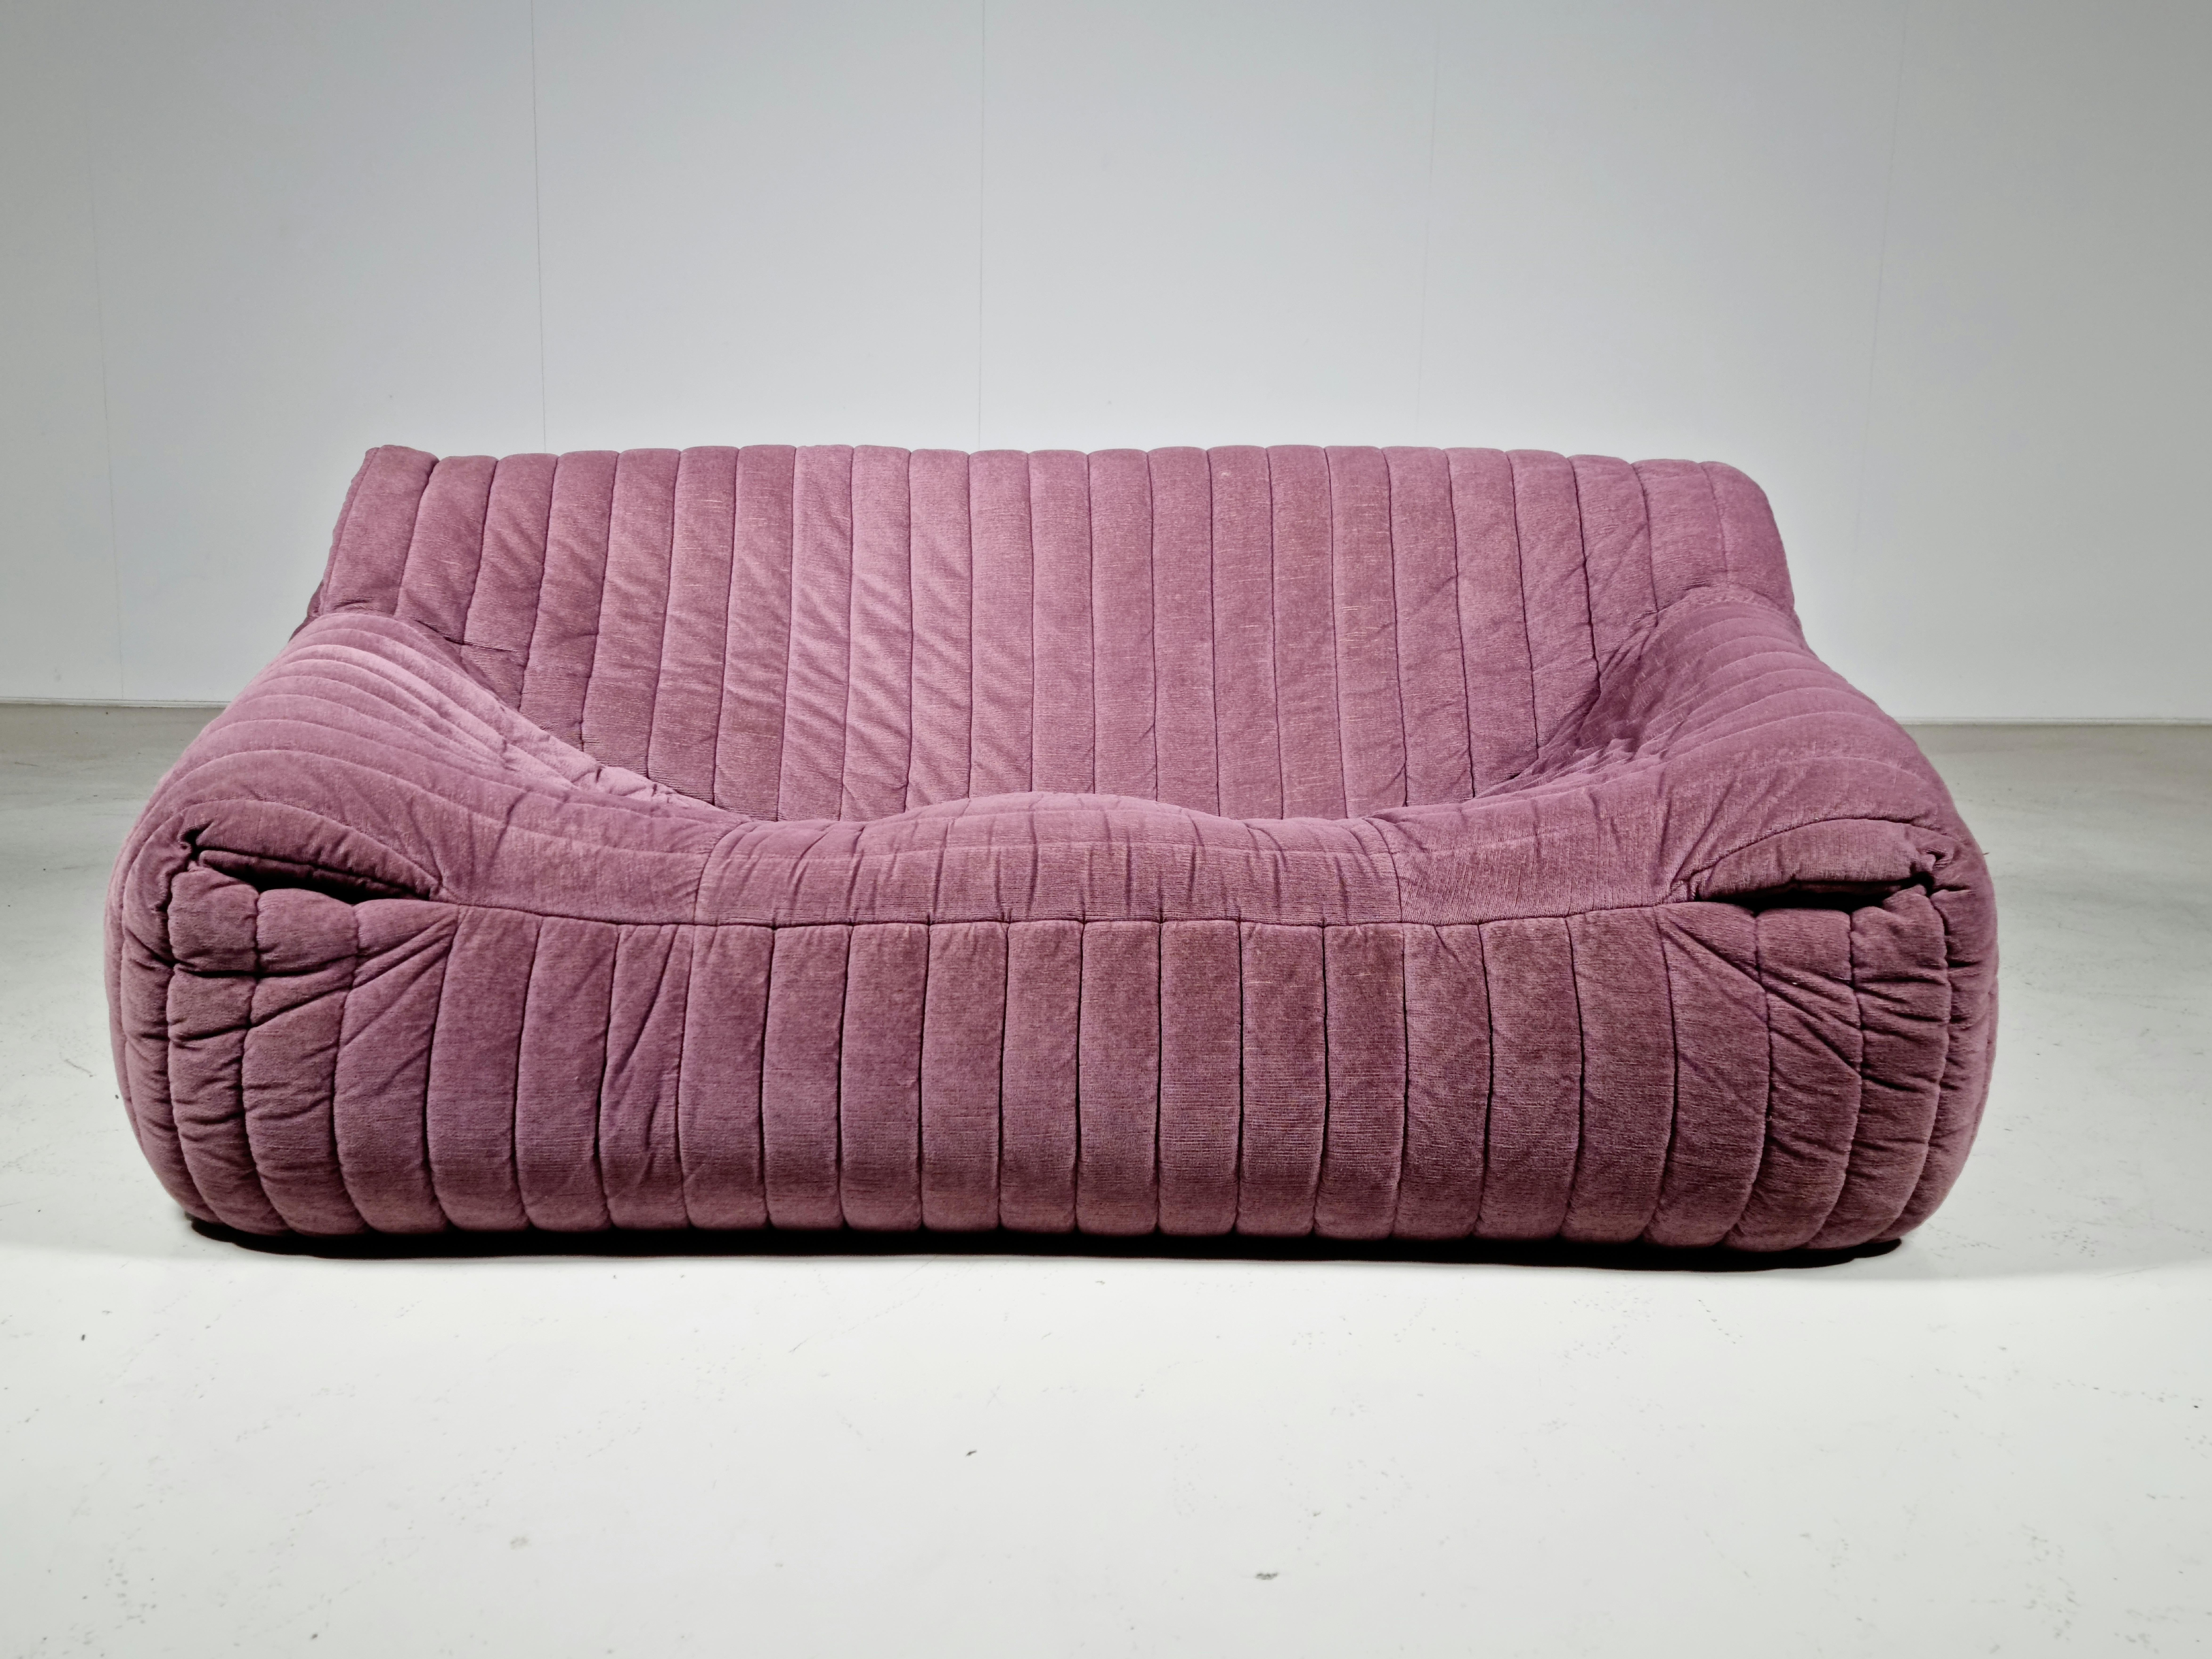 The Sandra sofa was designed by Annie Hiéronimus for Cinna after she joined the Roset Bureau d'Etudes in 1976.

Constructed fully from foam, the sofa has a solid form that is upholstered in its original soft purple ribbed velour fabric. It's